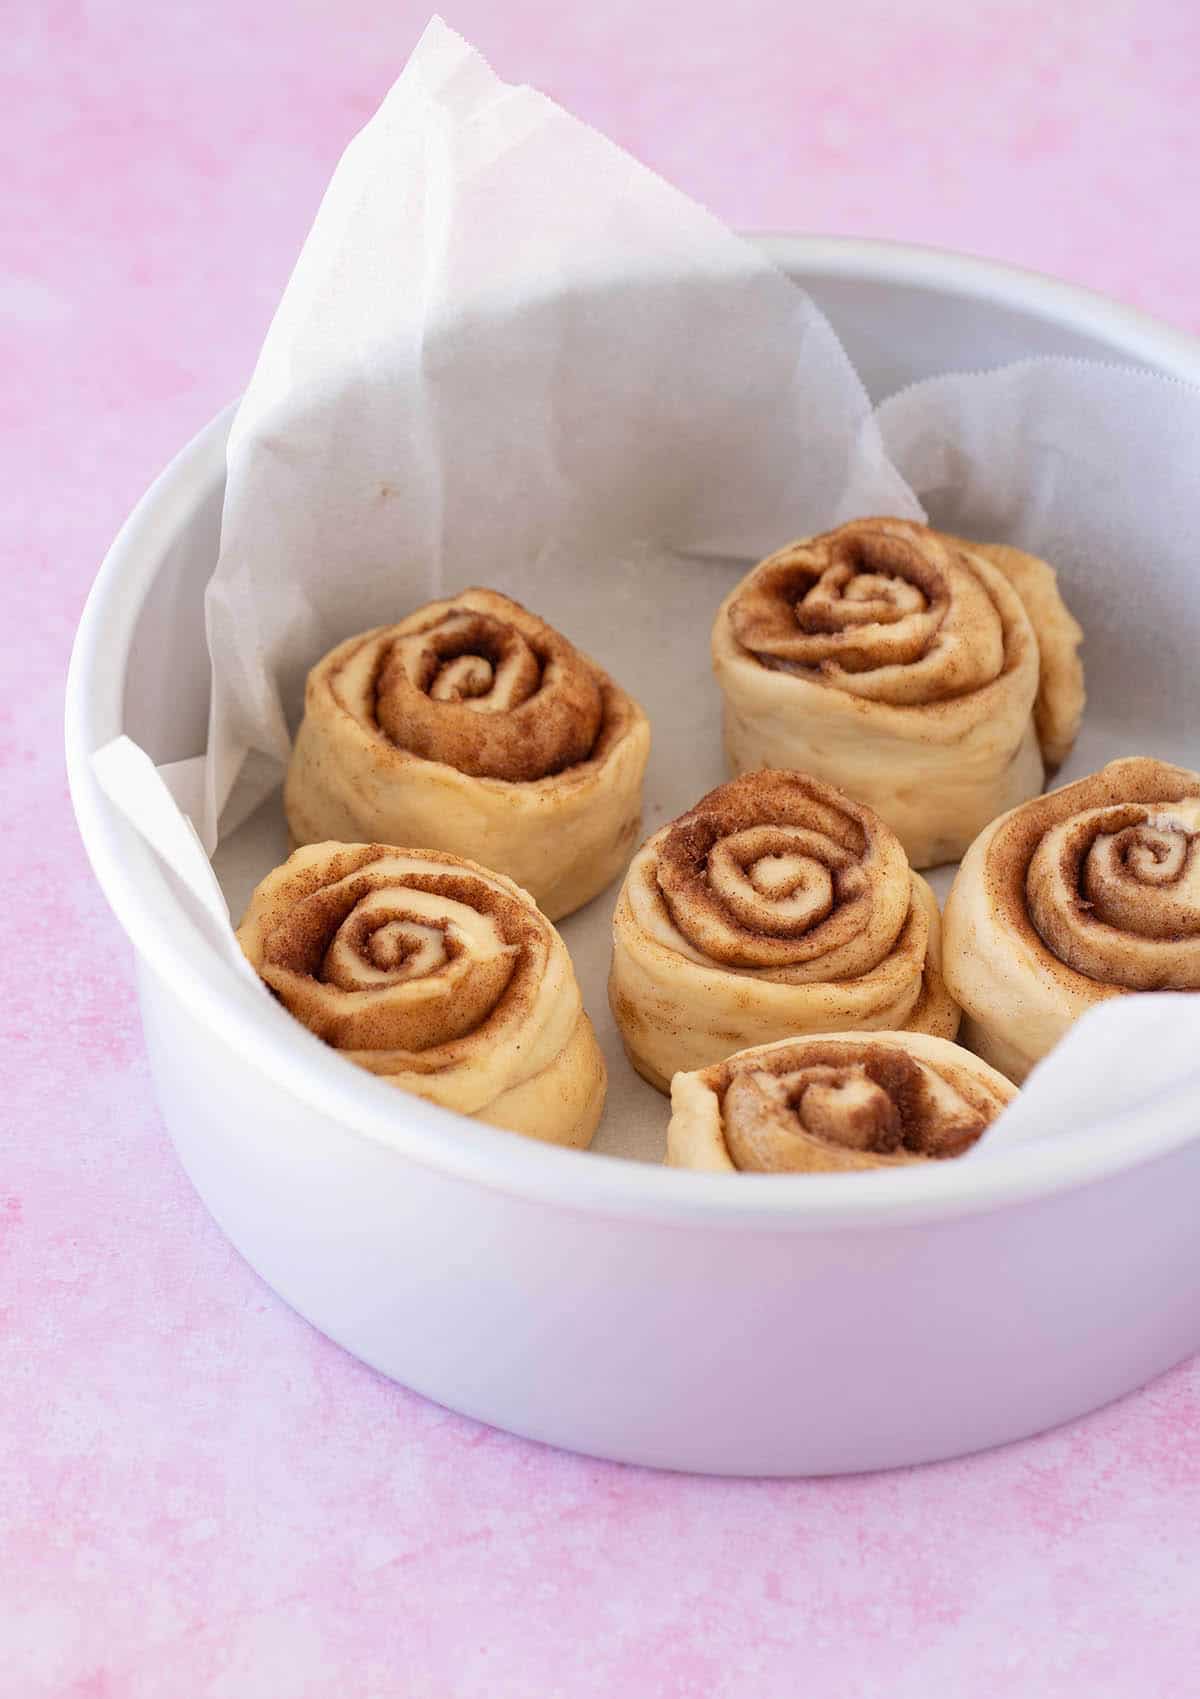 Six cinnamon rolls sitting in a cake pan ready to be baked